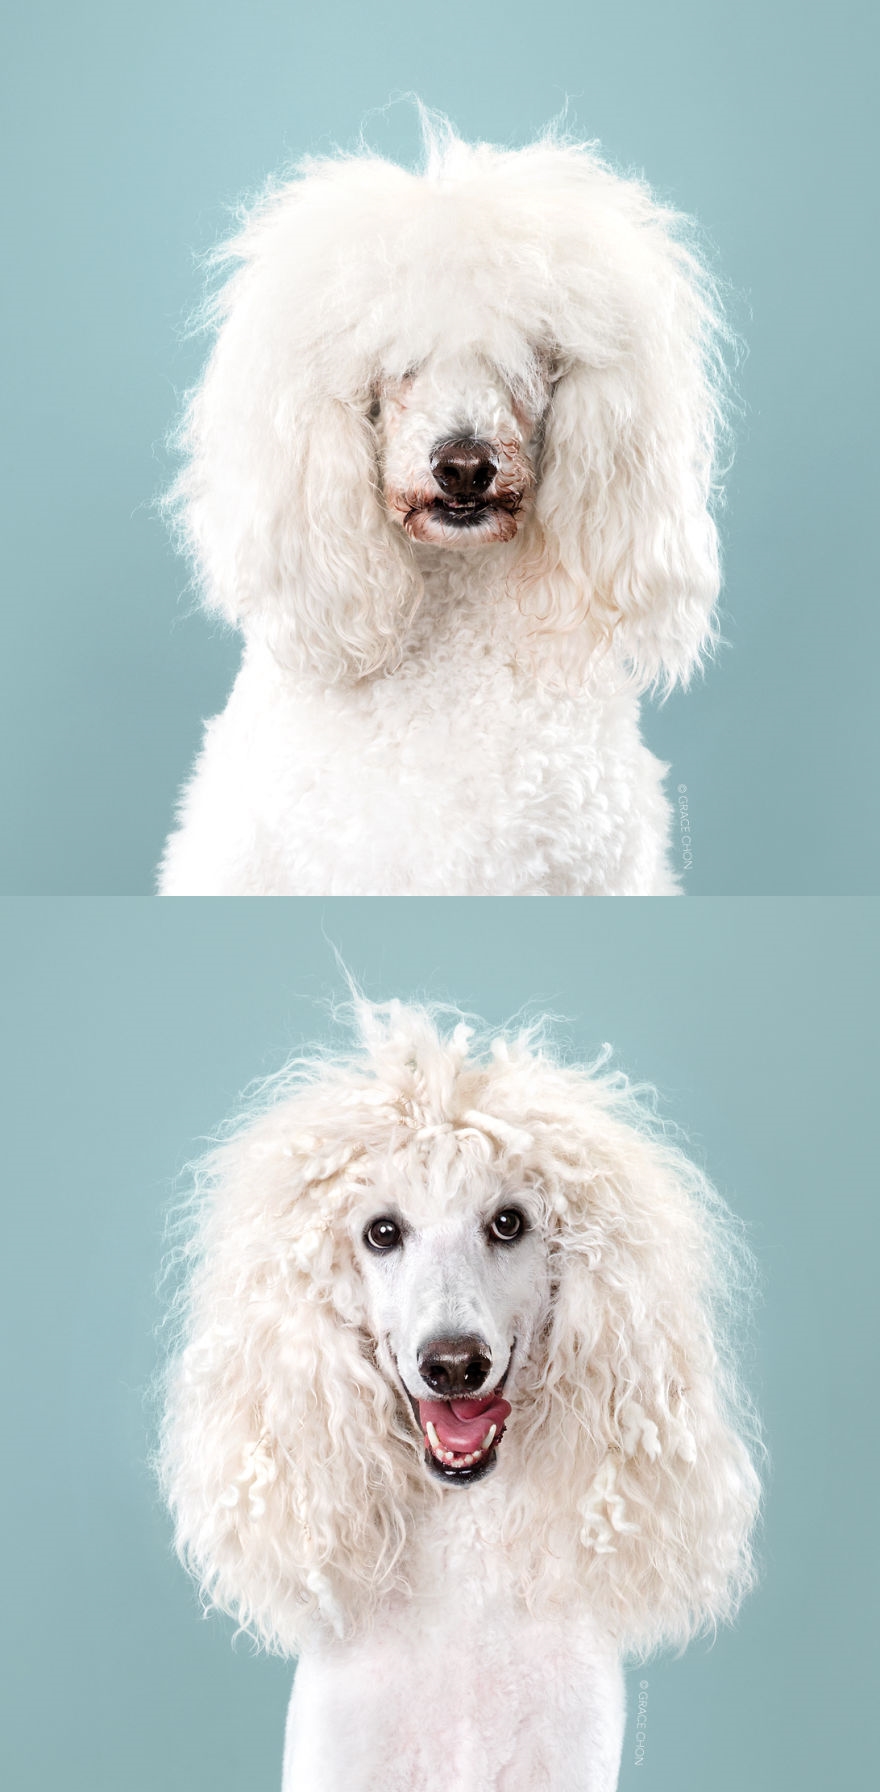 dogs-before-and-after-their-h